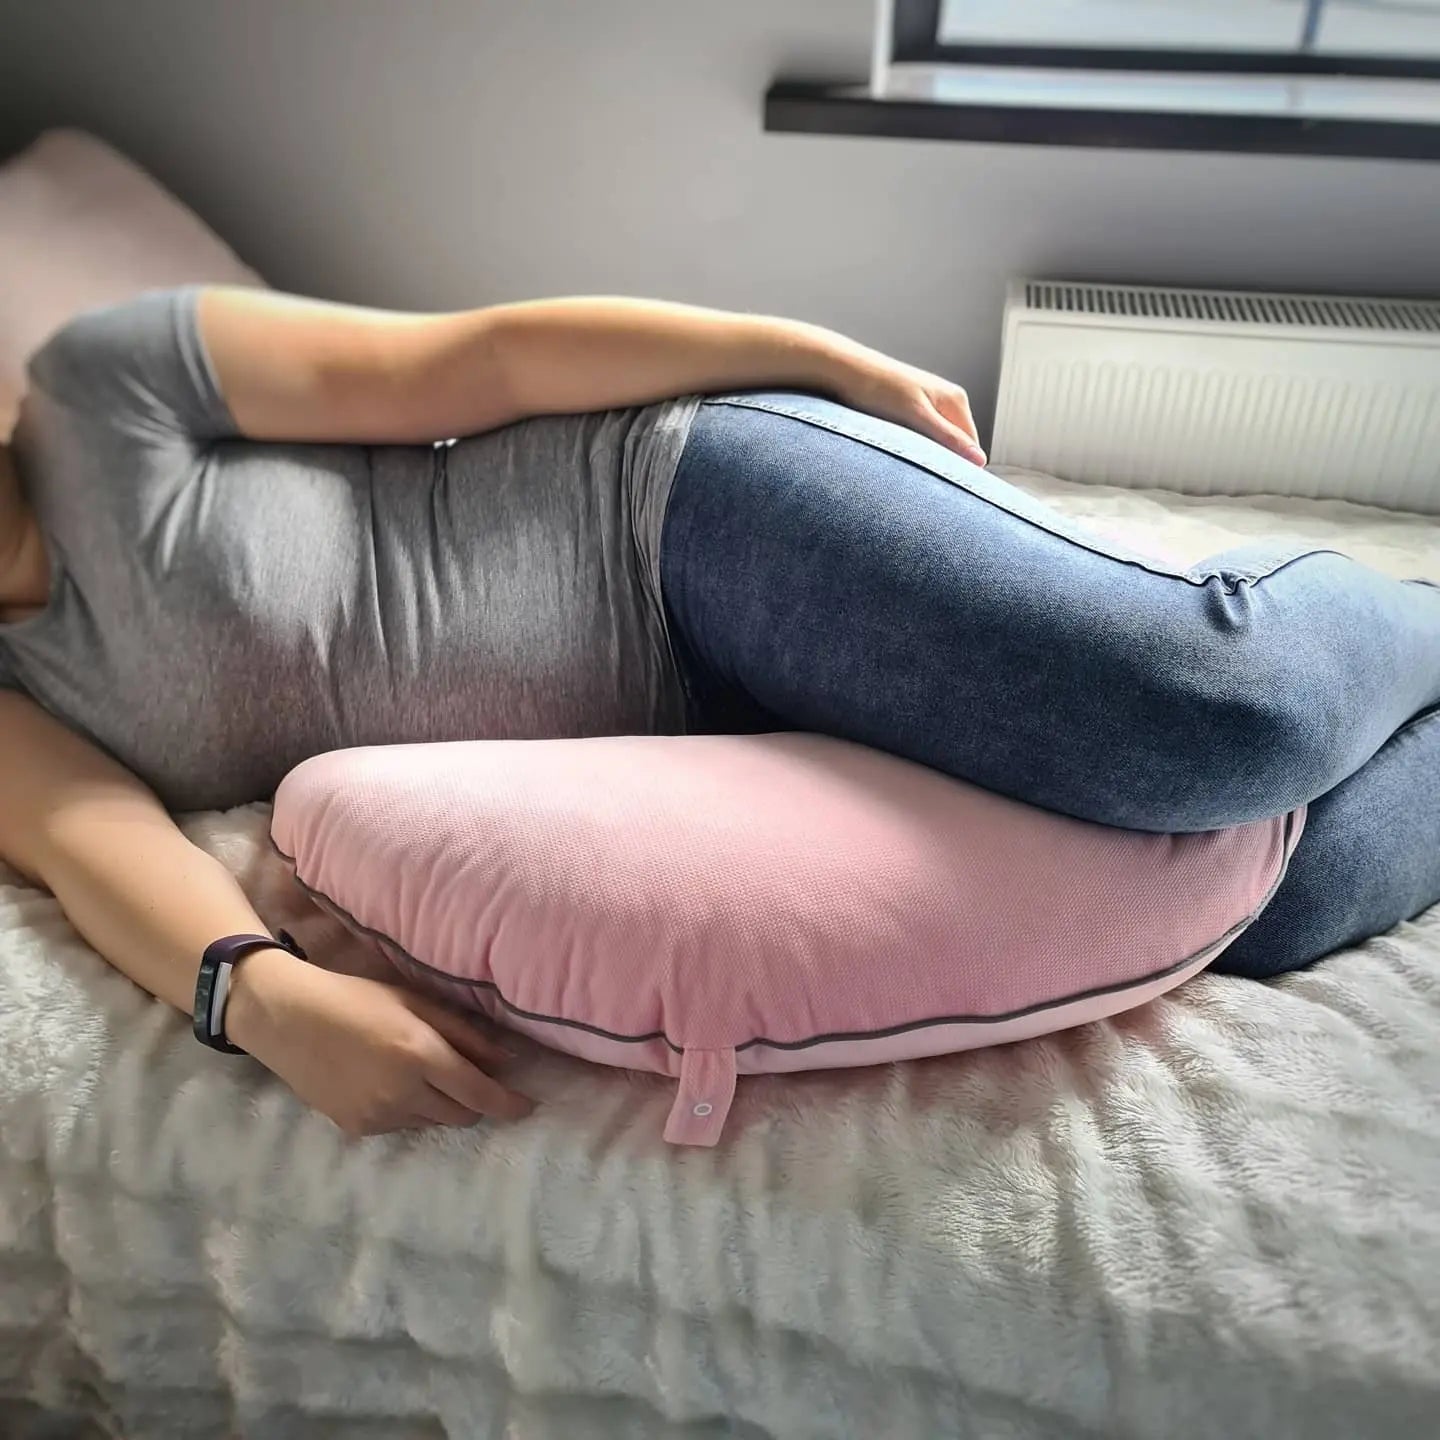 pregnancy suport back support pillow nursing and feeding pillows evcushy